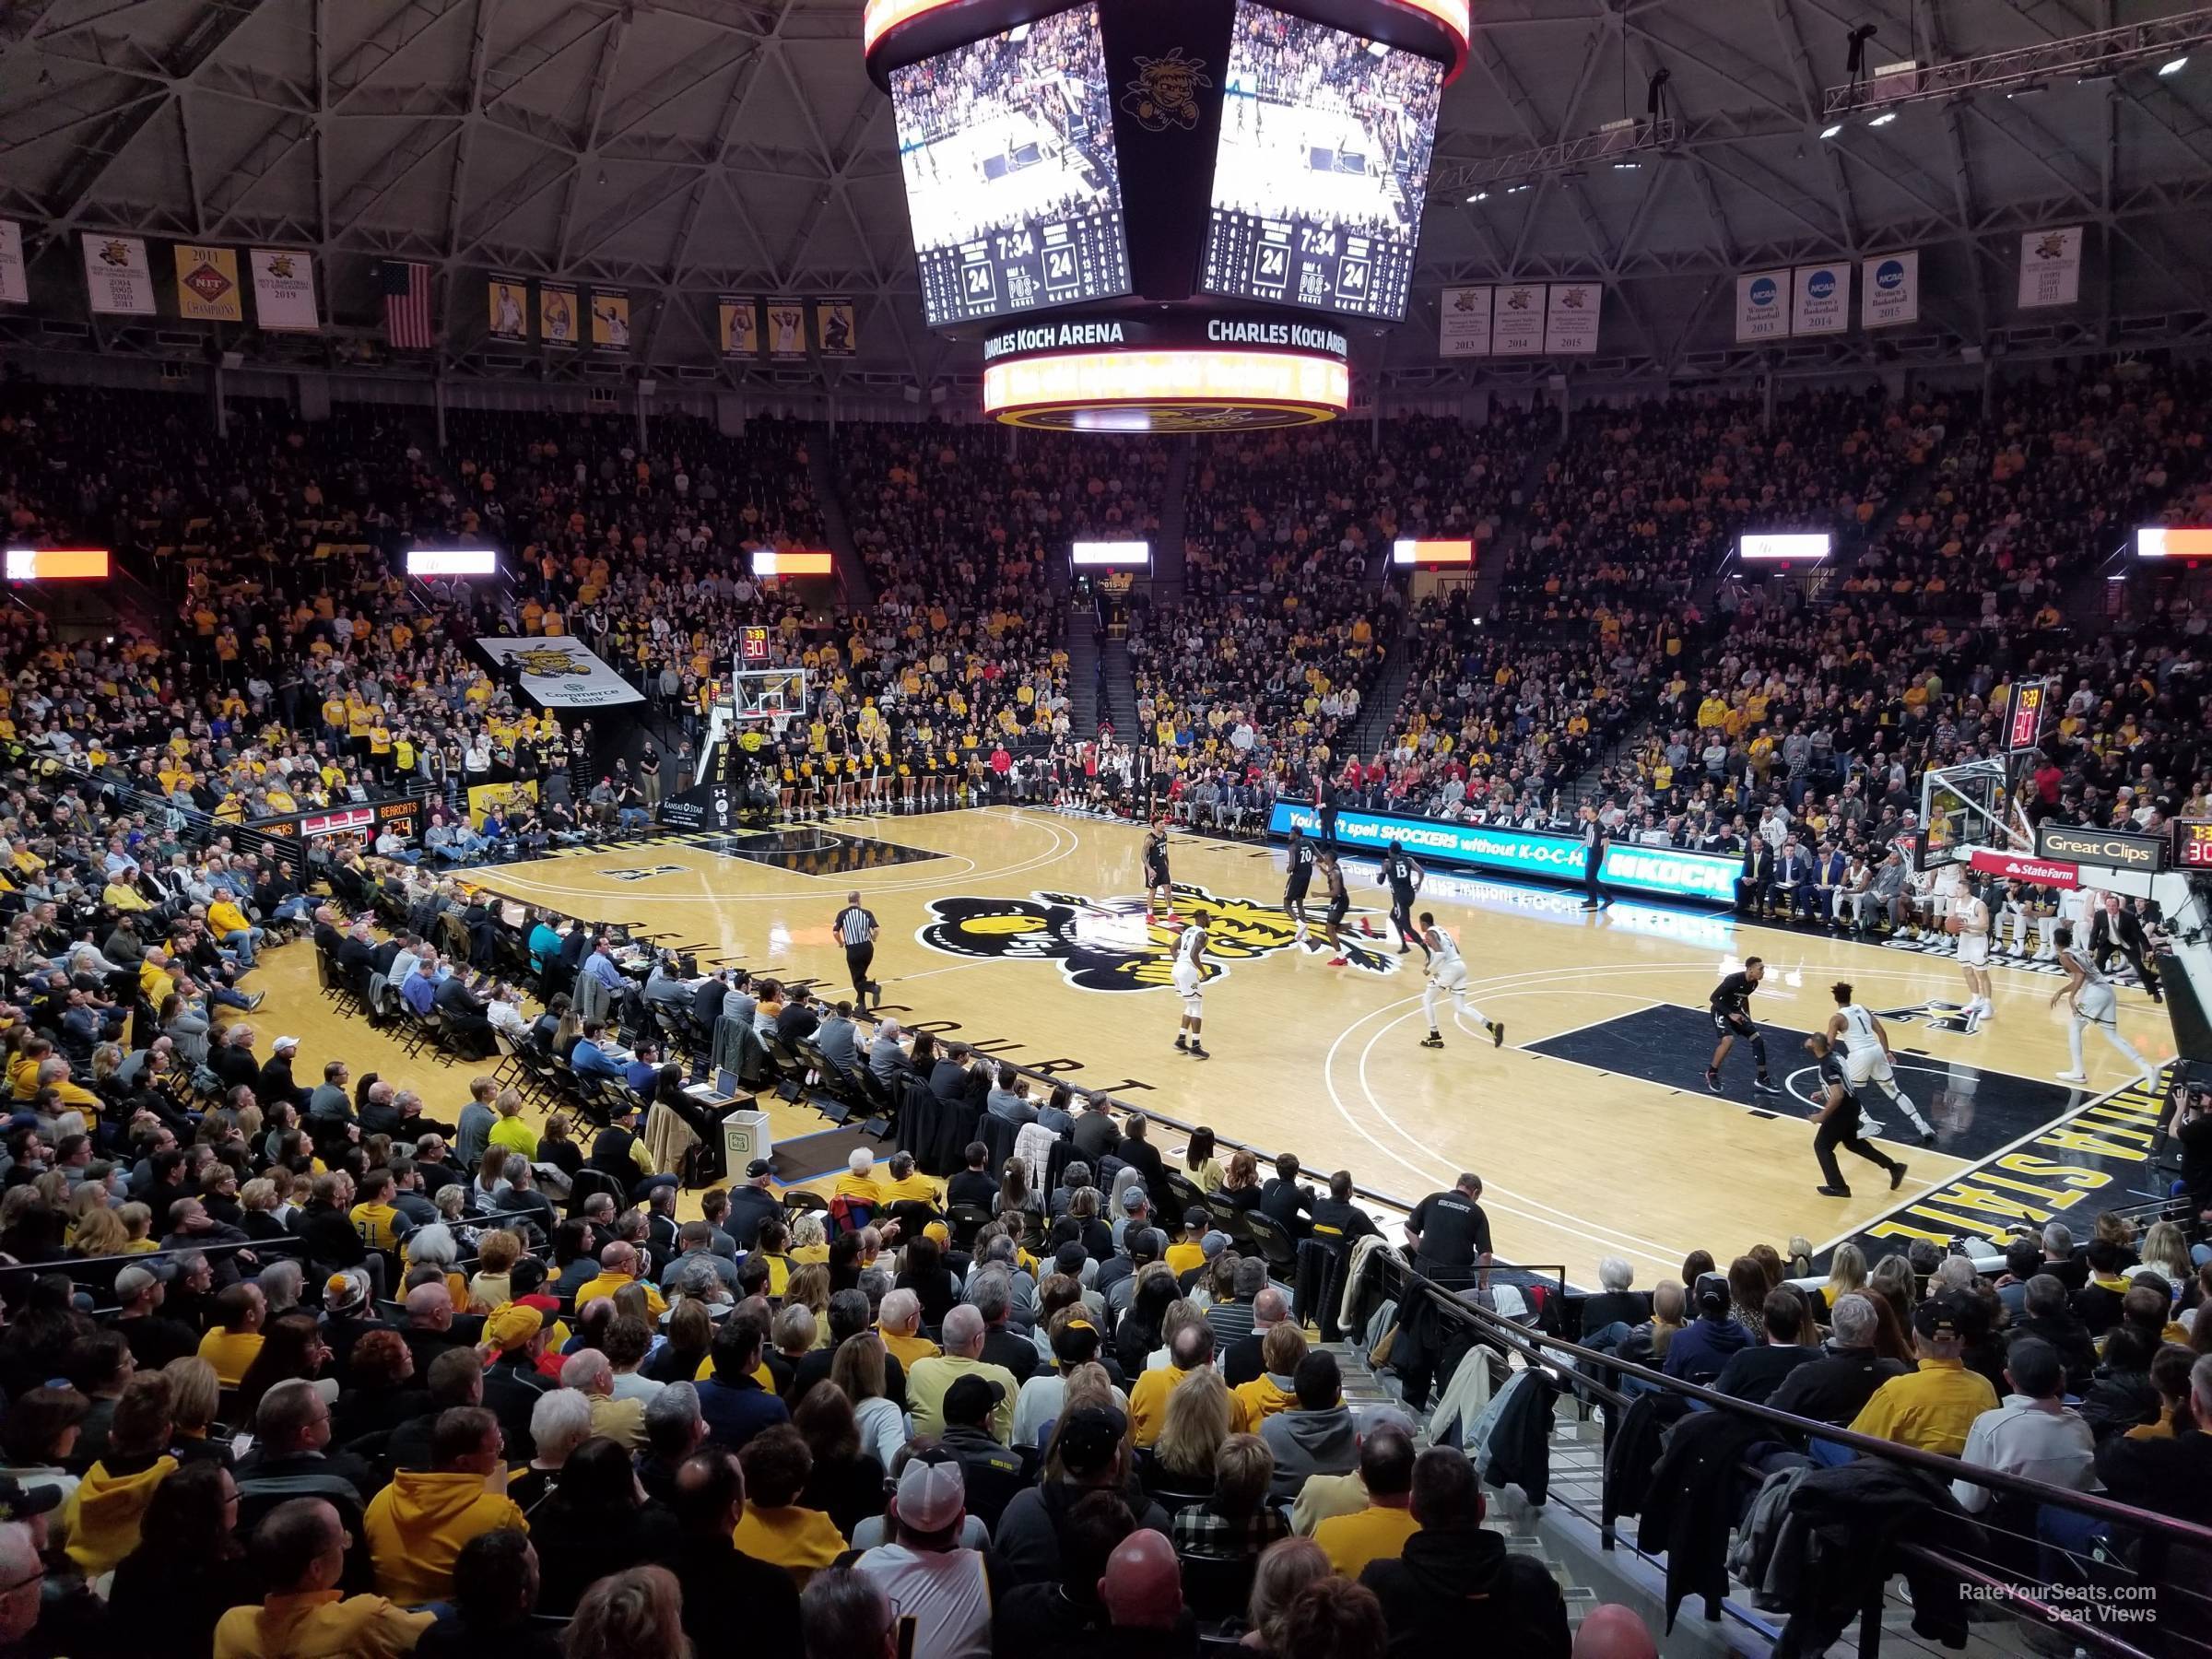 section 103, row 21 seat view  - charles koch arena